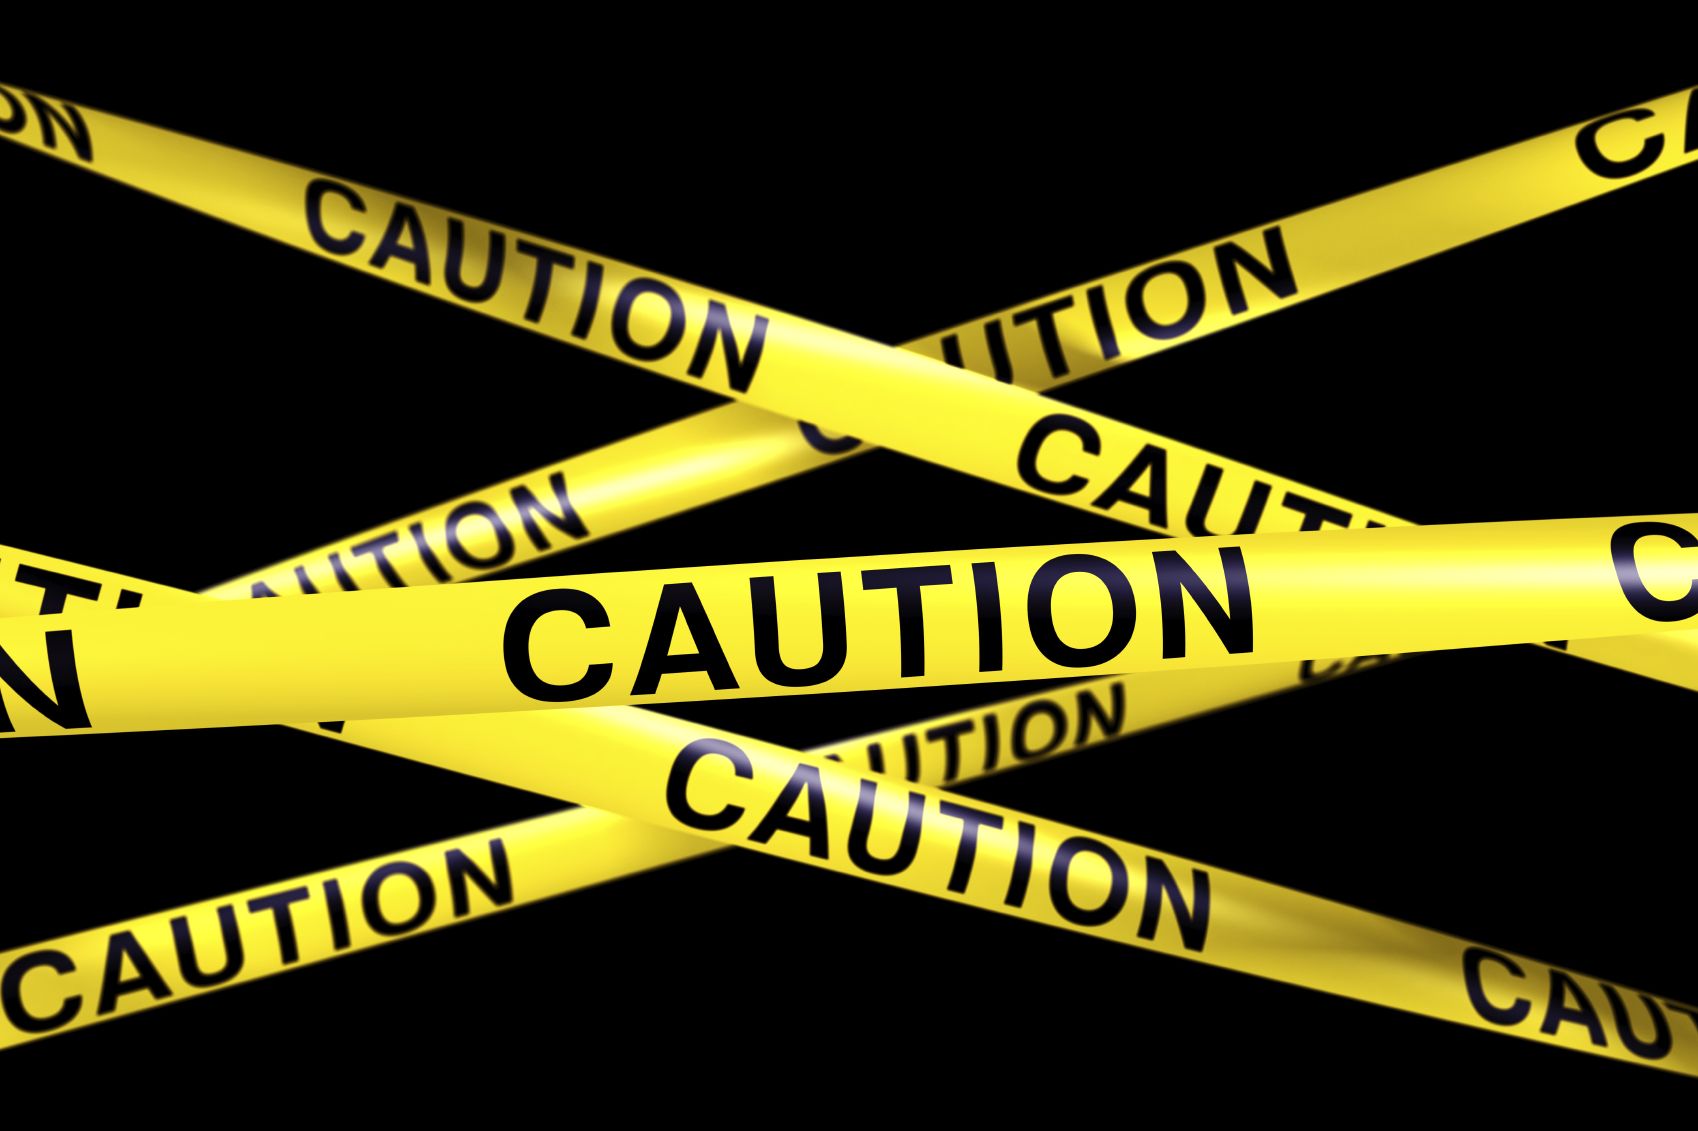 Caution Tapeclipart Library.com